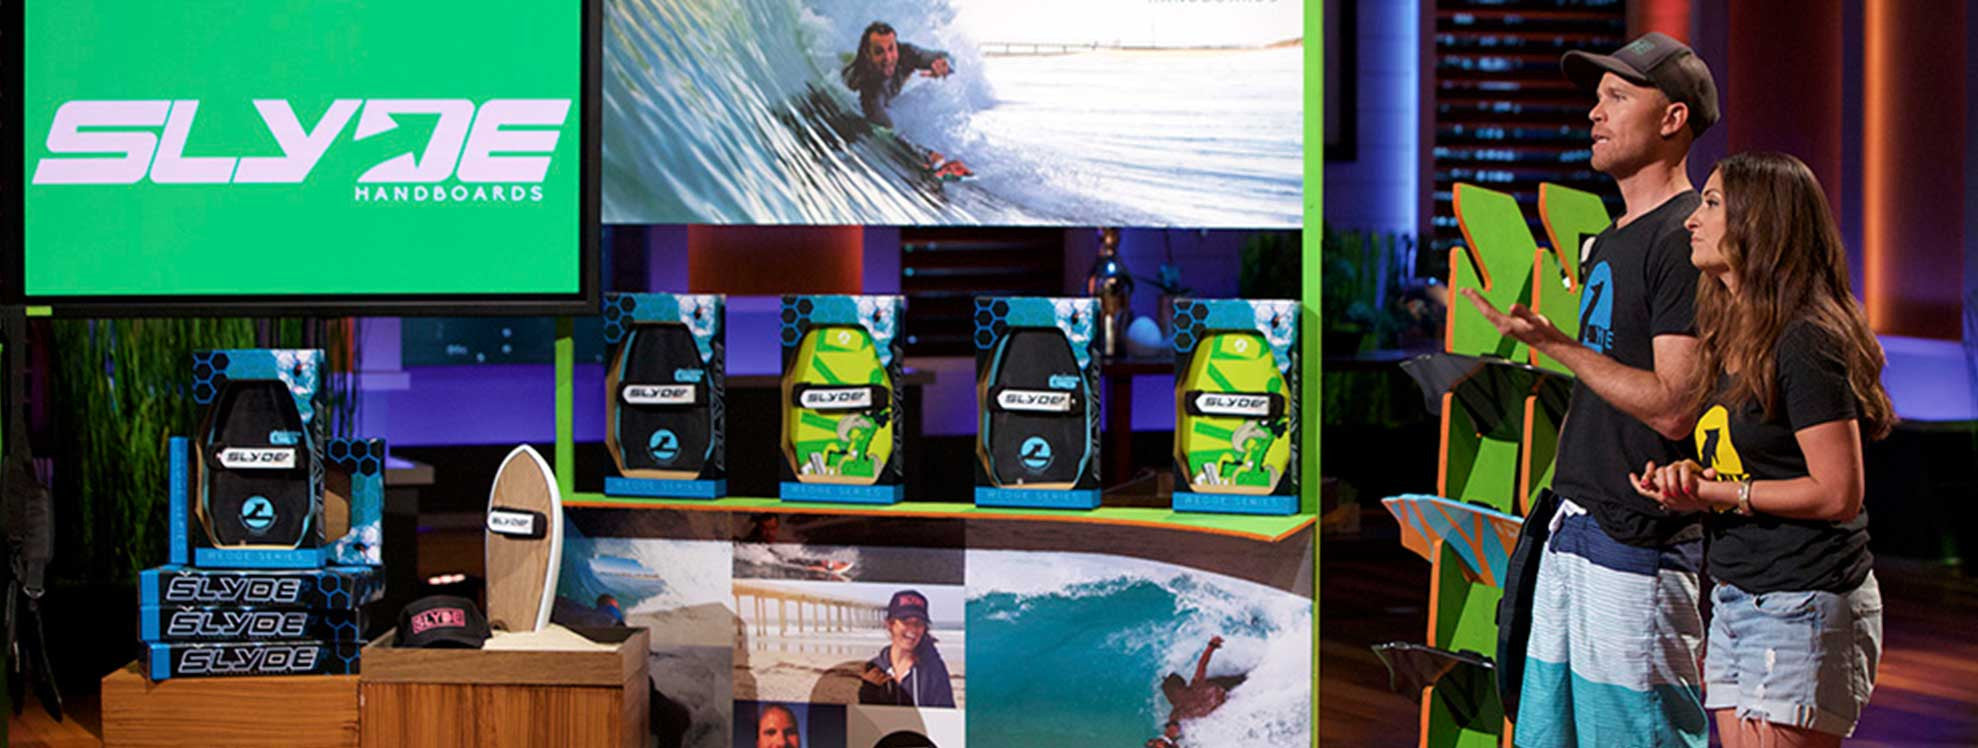 Slyde Handboards Pitch On Shark Tank Over 73,000 Youtube Views